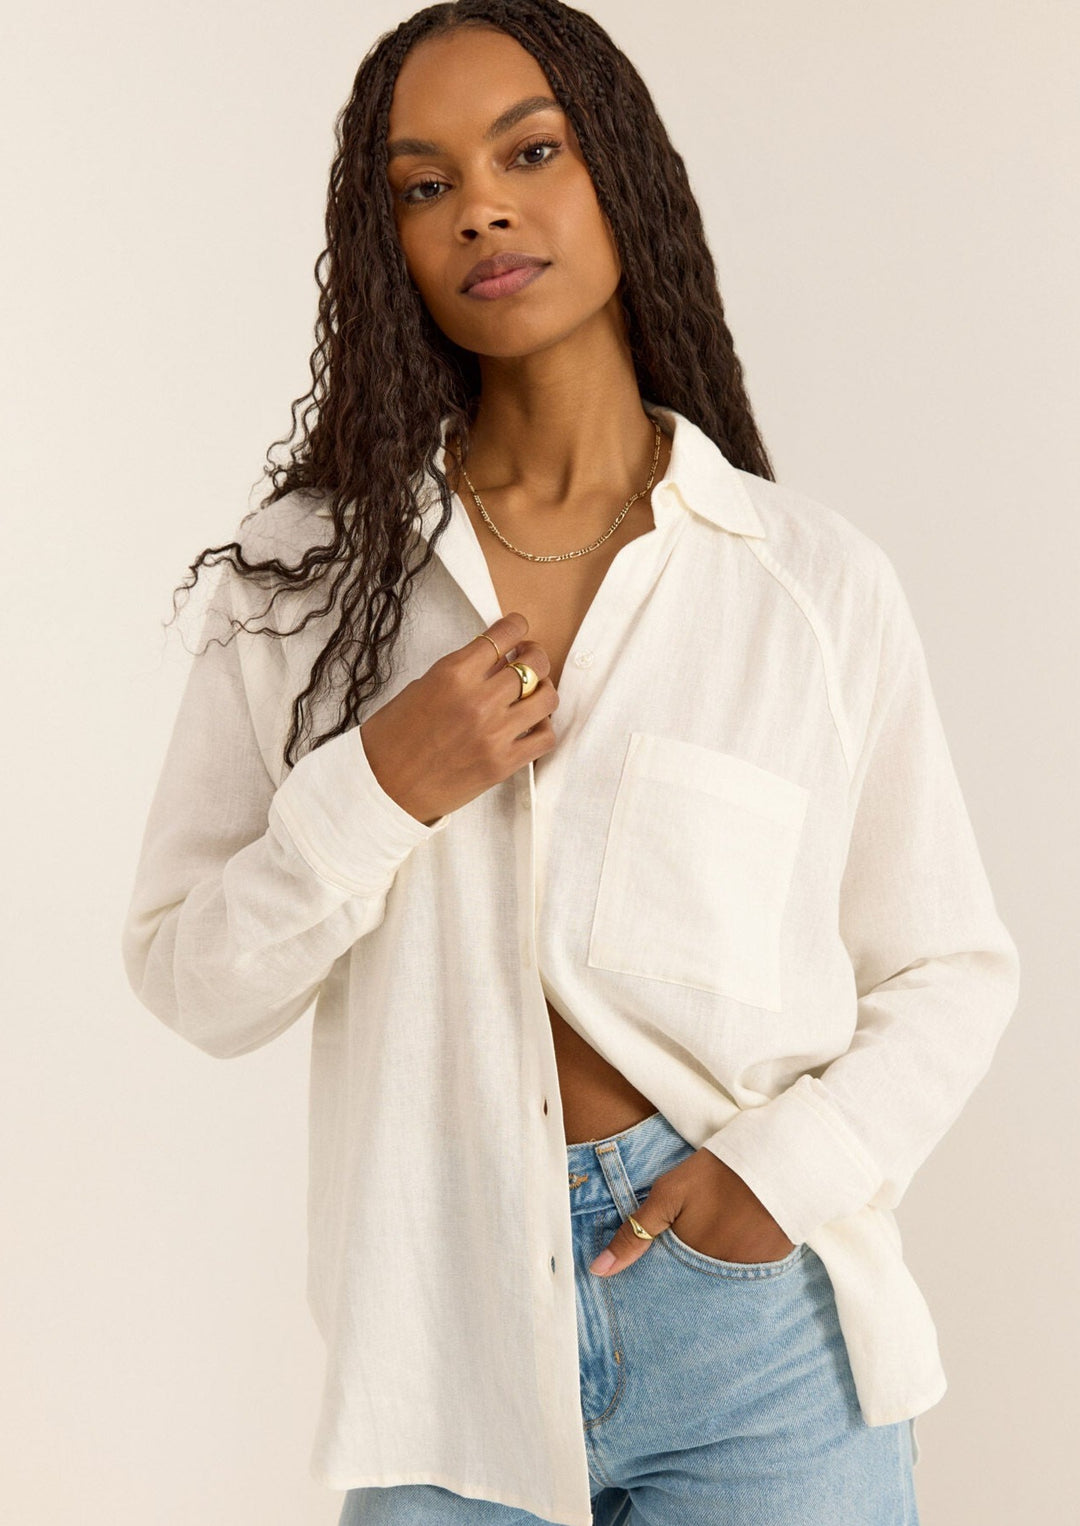 The Perfect Linen Top